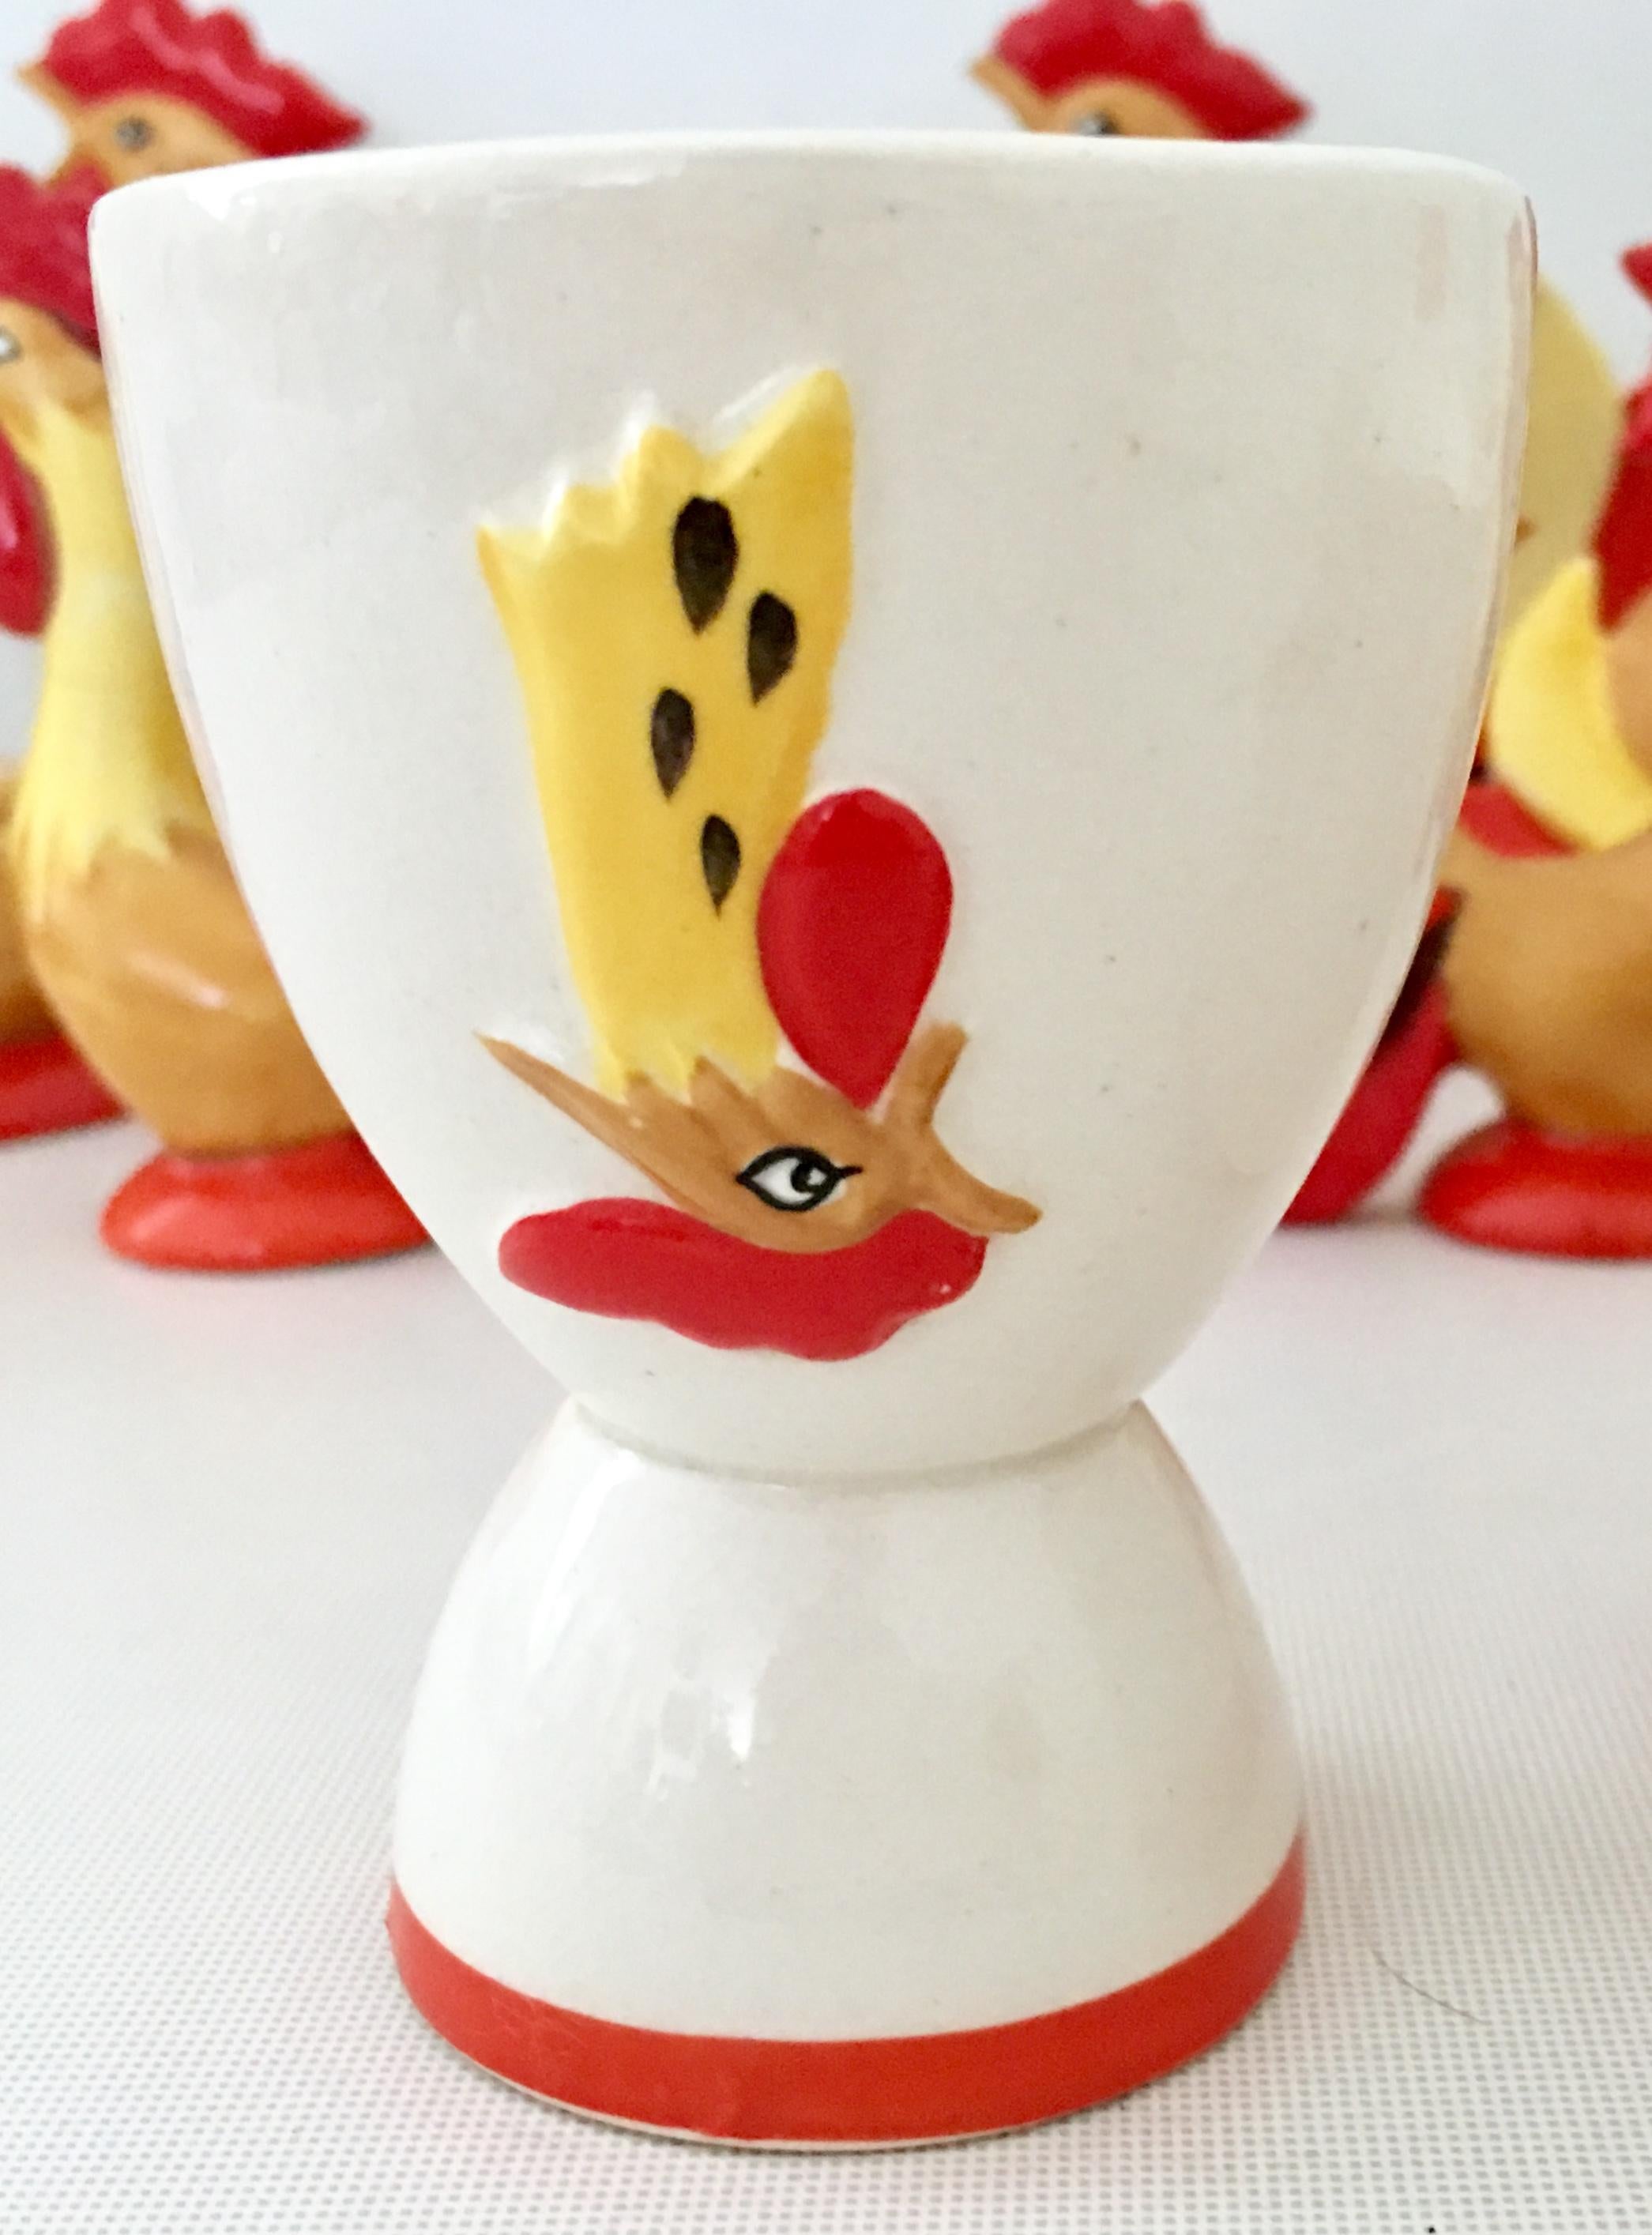 Japanese 1960s Ceramic 'Red Rooster Coq Rougue' S/14 by, Holt Howard